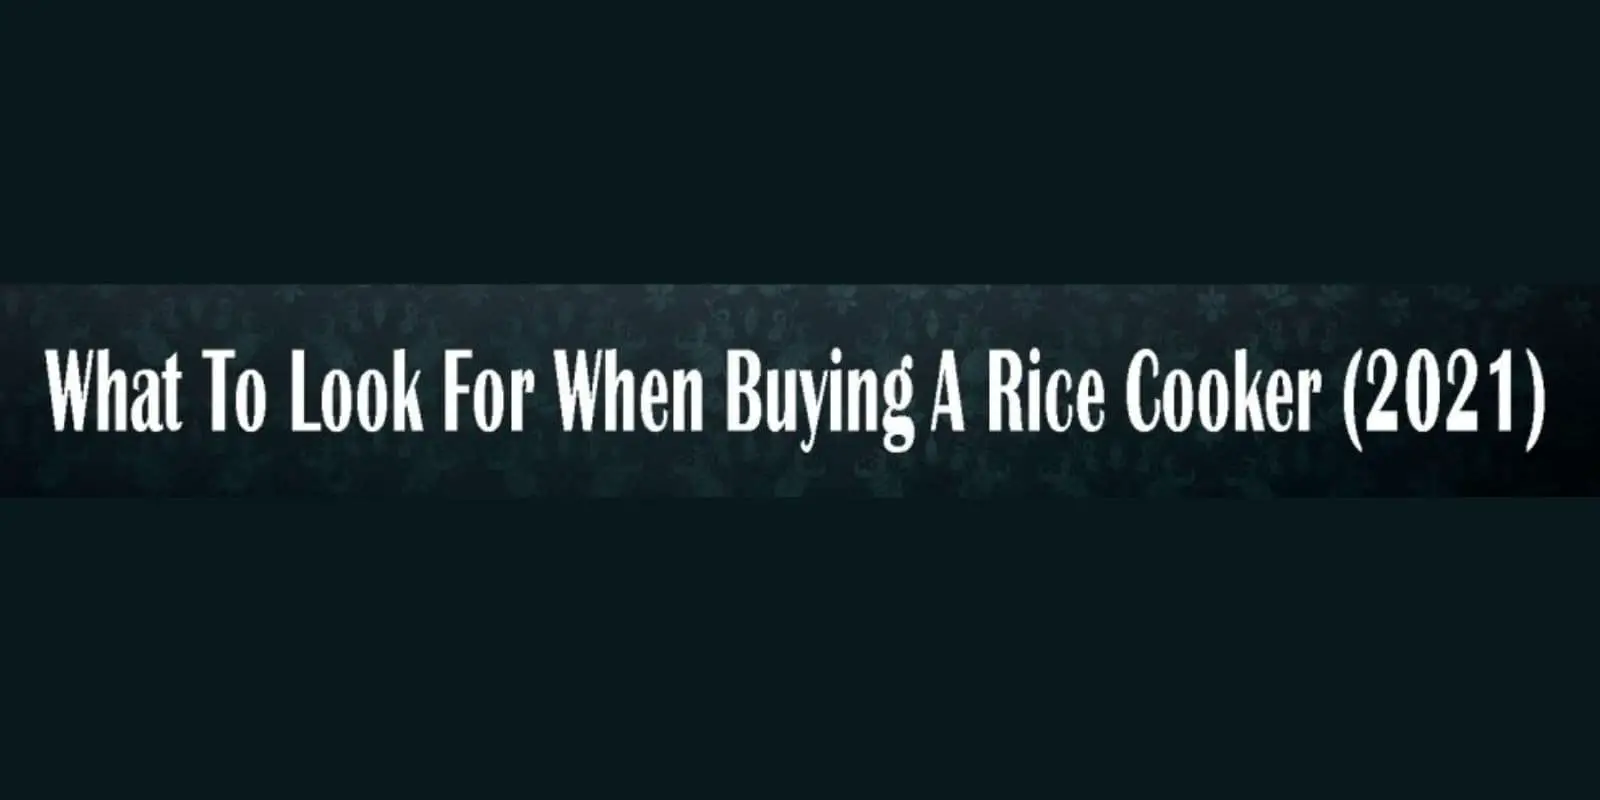 What To Look For When Buying A Rice Cooker? (2022)